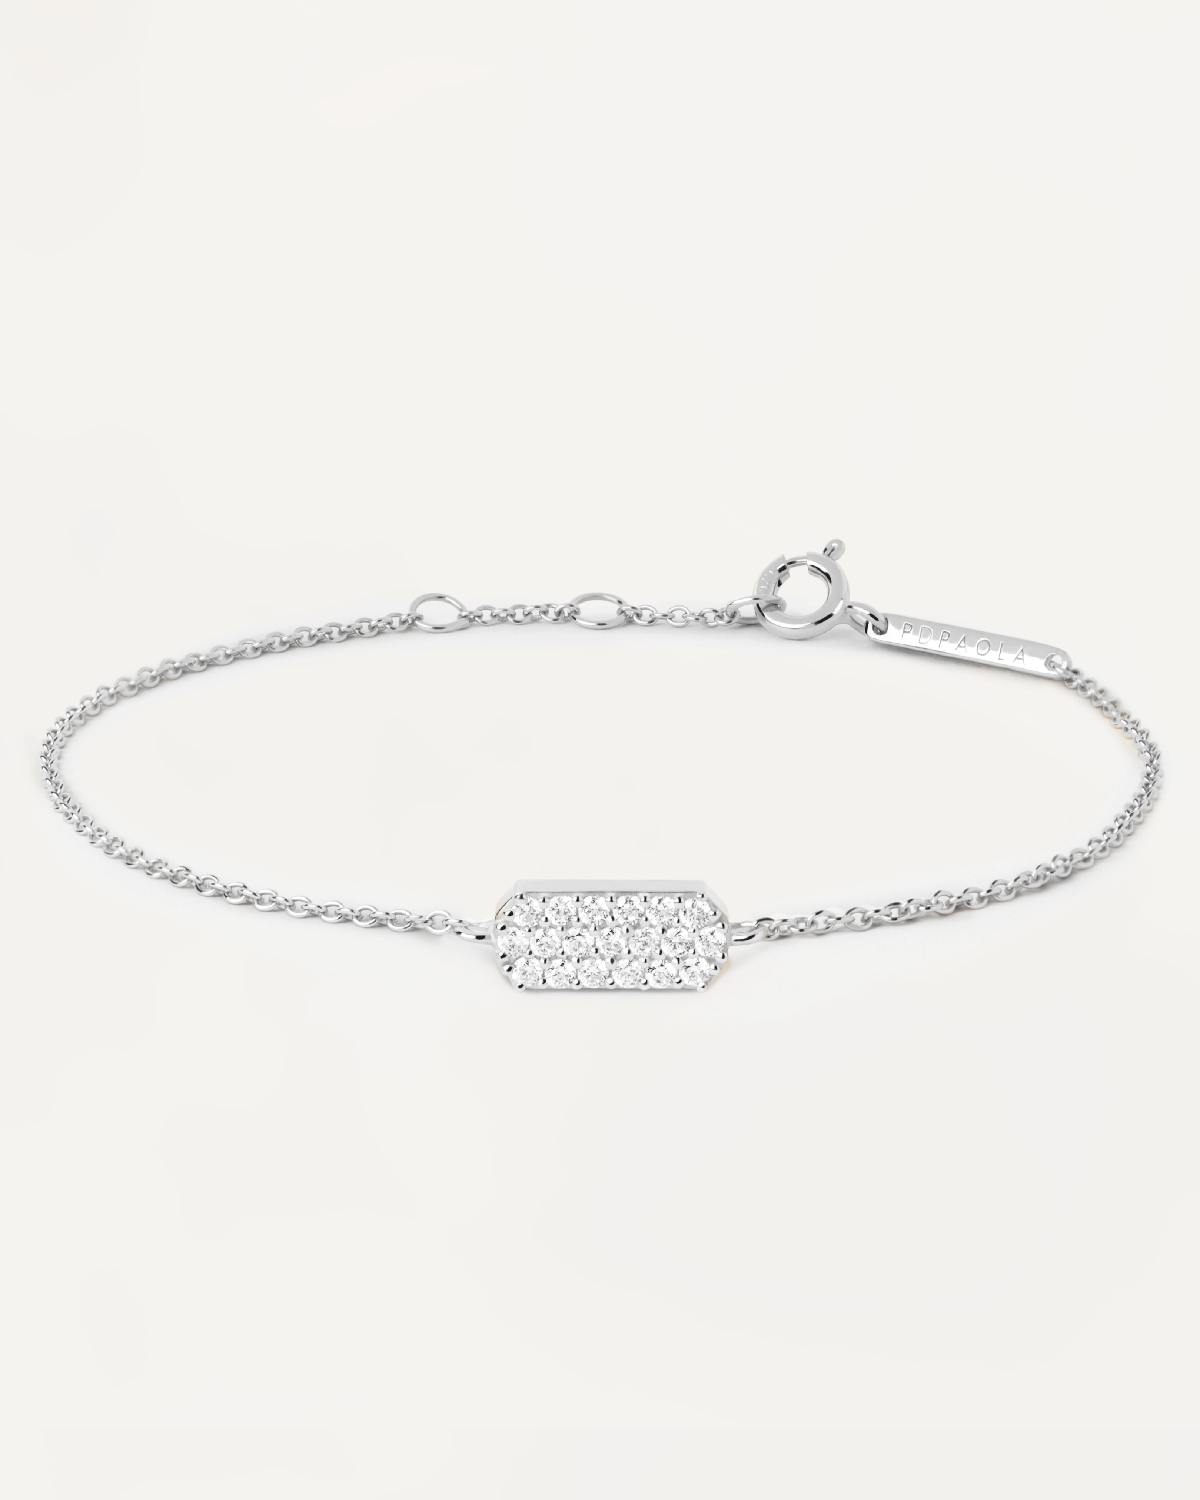 2023 Selection | Icy Silver Bracelet. Sterling silver bracelet with oval motiv and white zirconia. Get the latest arrival from PDPAOLA. Place your order safely and get this Best Seller. Free Shipping.